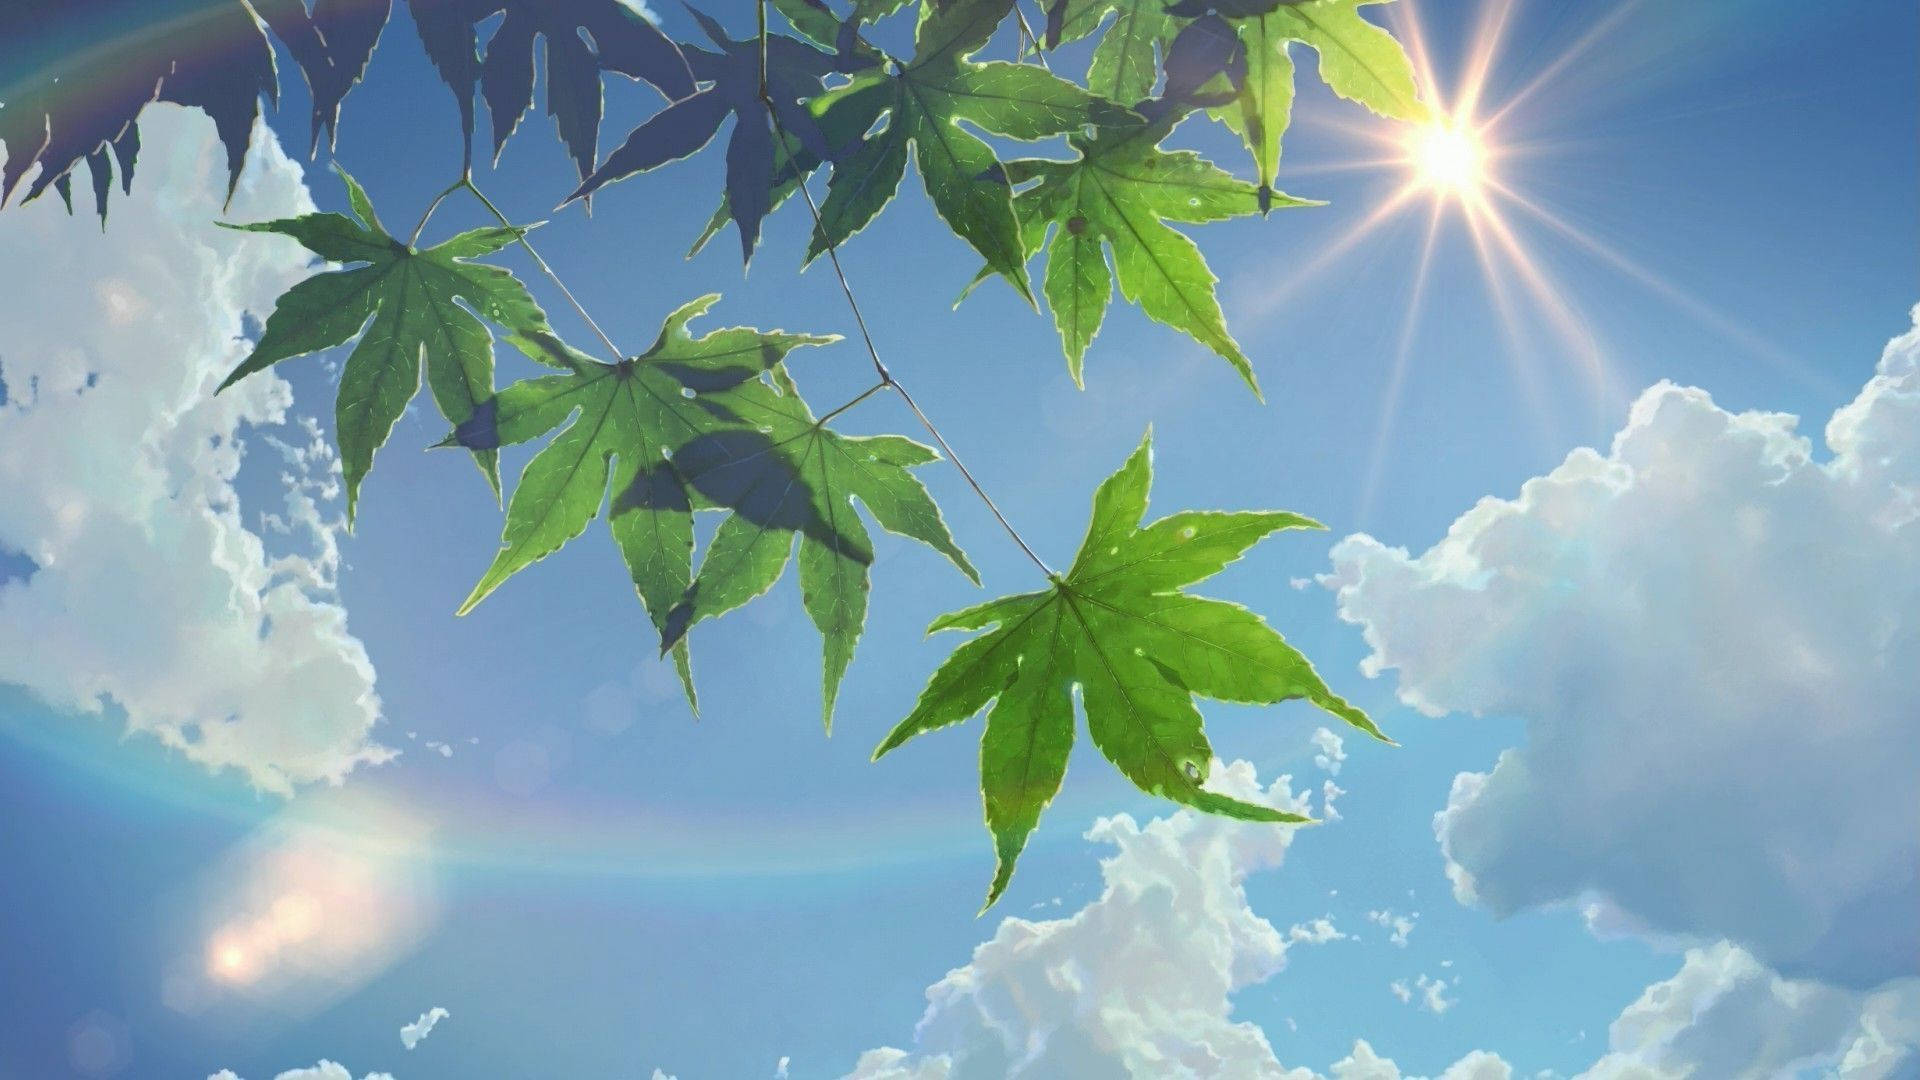 A branch of green leaves with the sun shining through them - Anime landscape, garden, nature